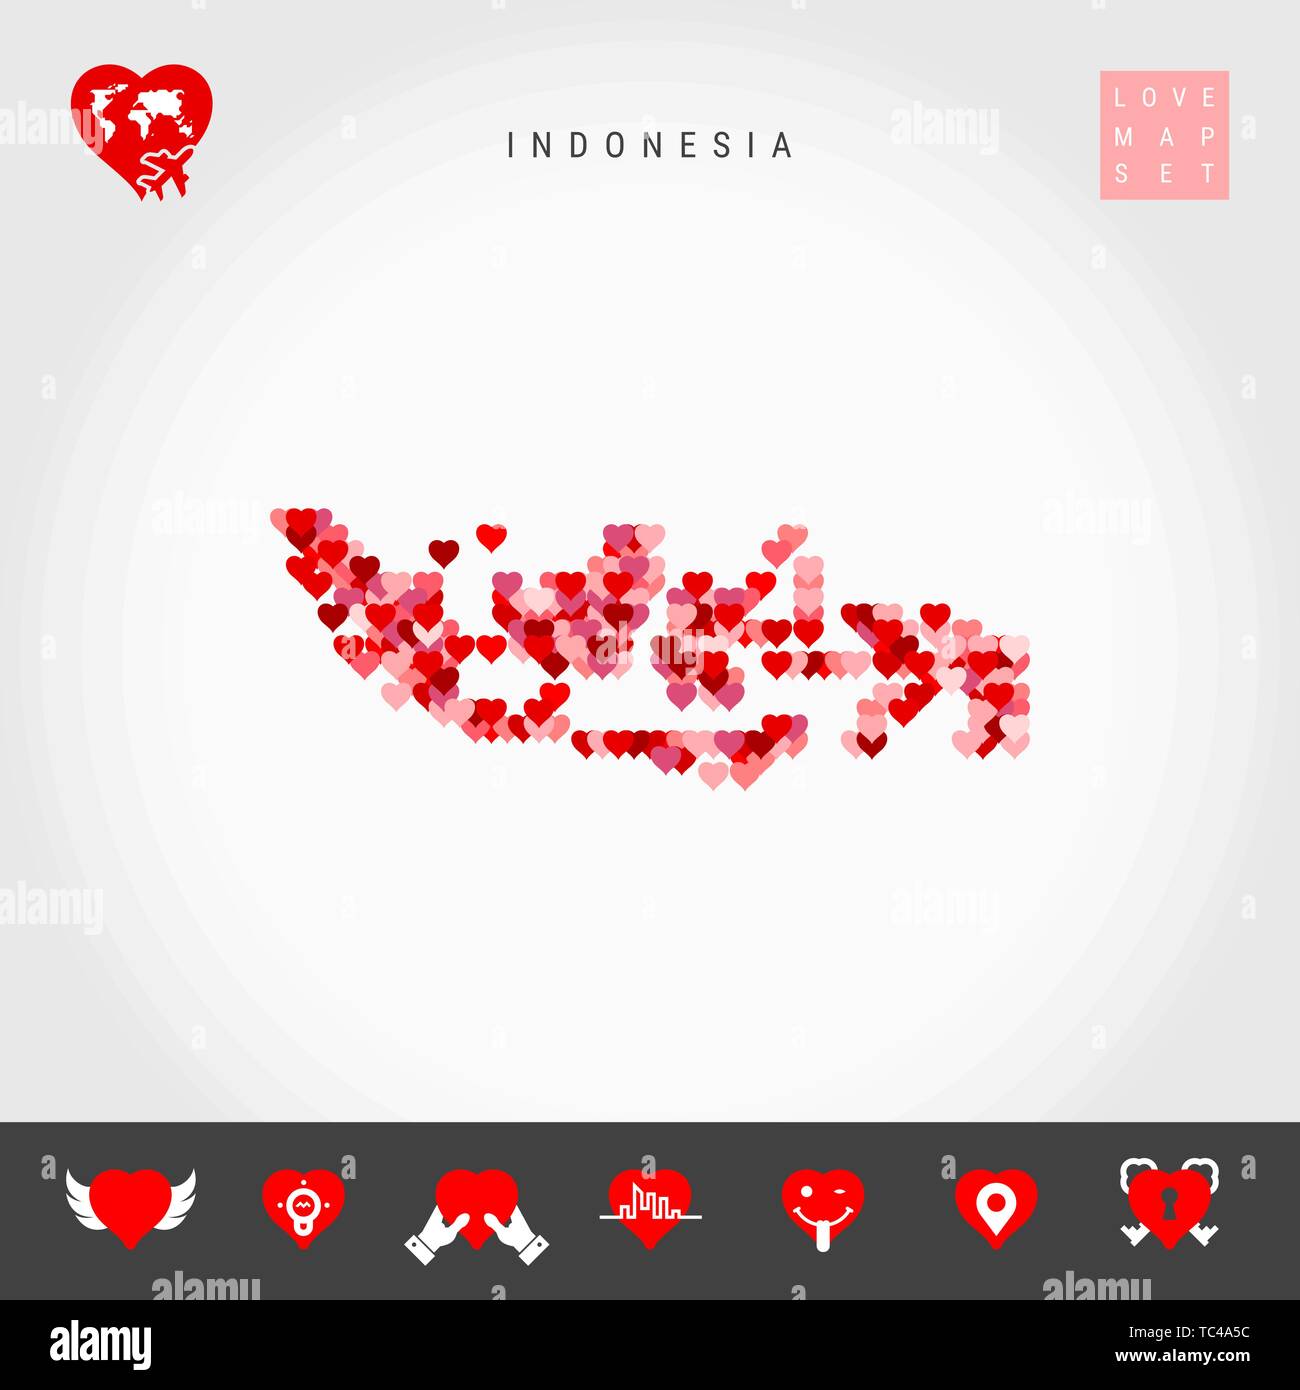 I Love Indonesia. Red and Pink Hearts Pattern Vector Map of Indonesia Isolated on Grey Background. Love Icon Set. Stock Vector